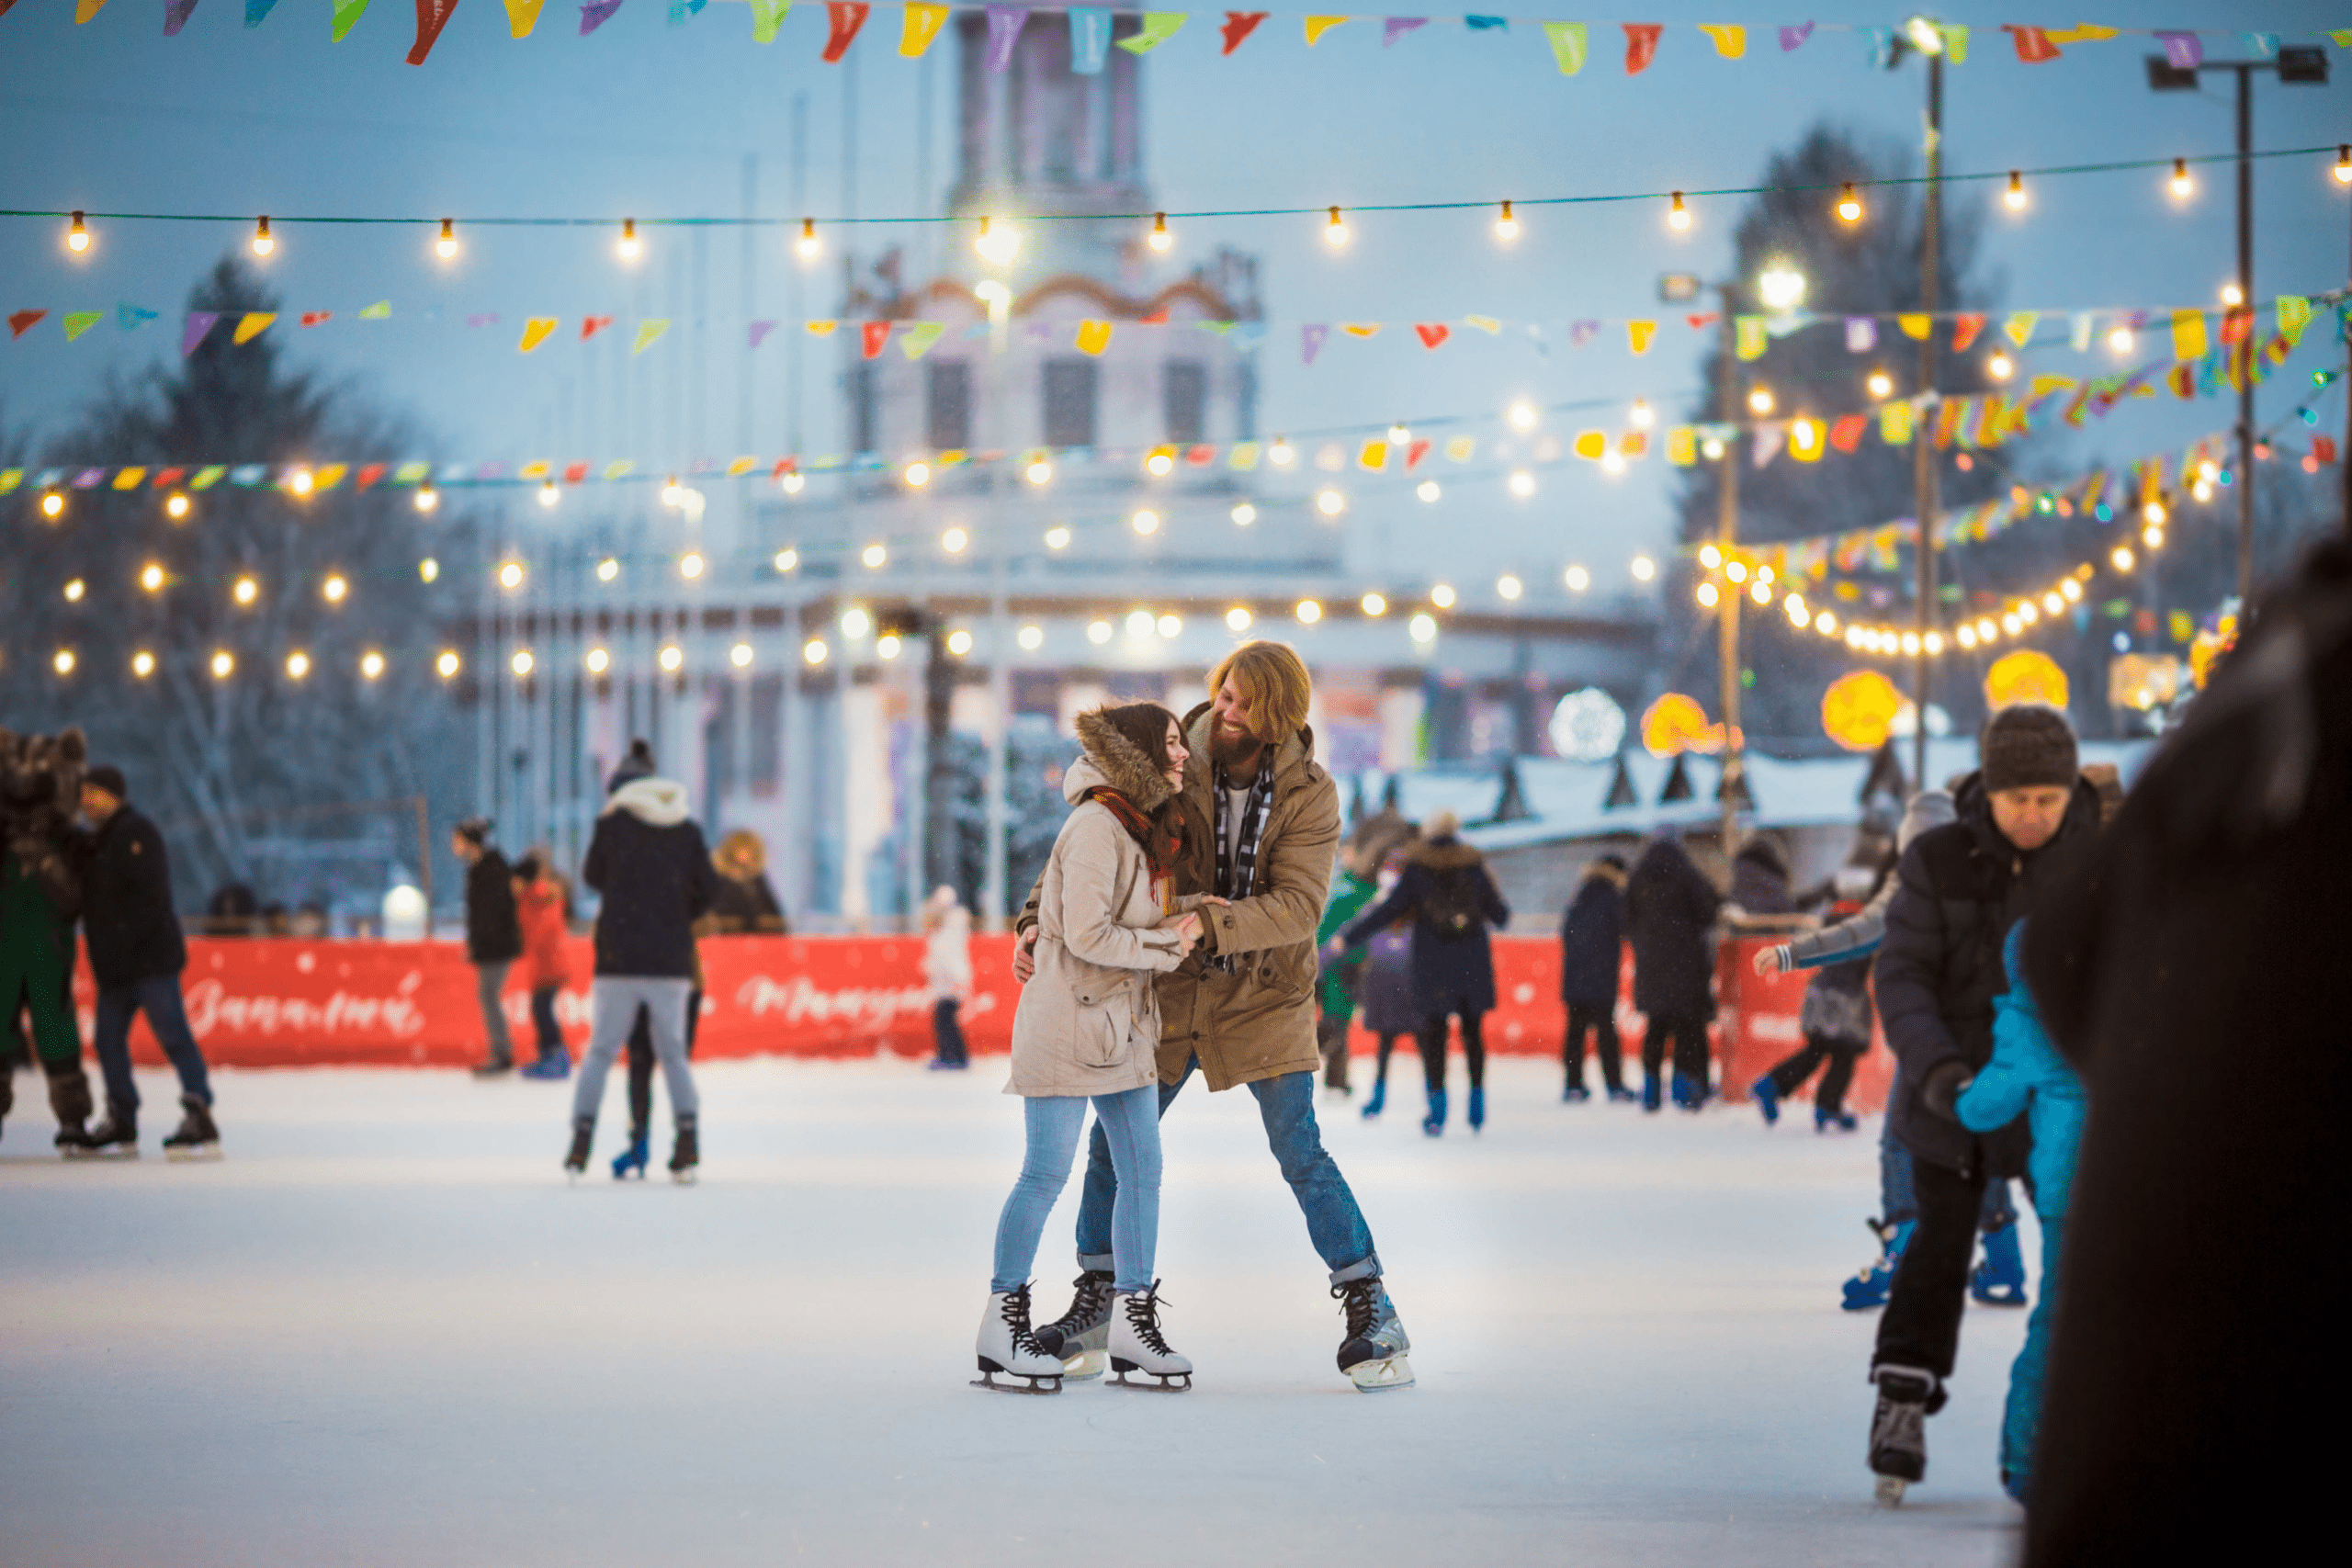 A couple skating on an ice skating rink downtown with lots of string lights and small flags above them